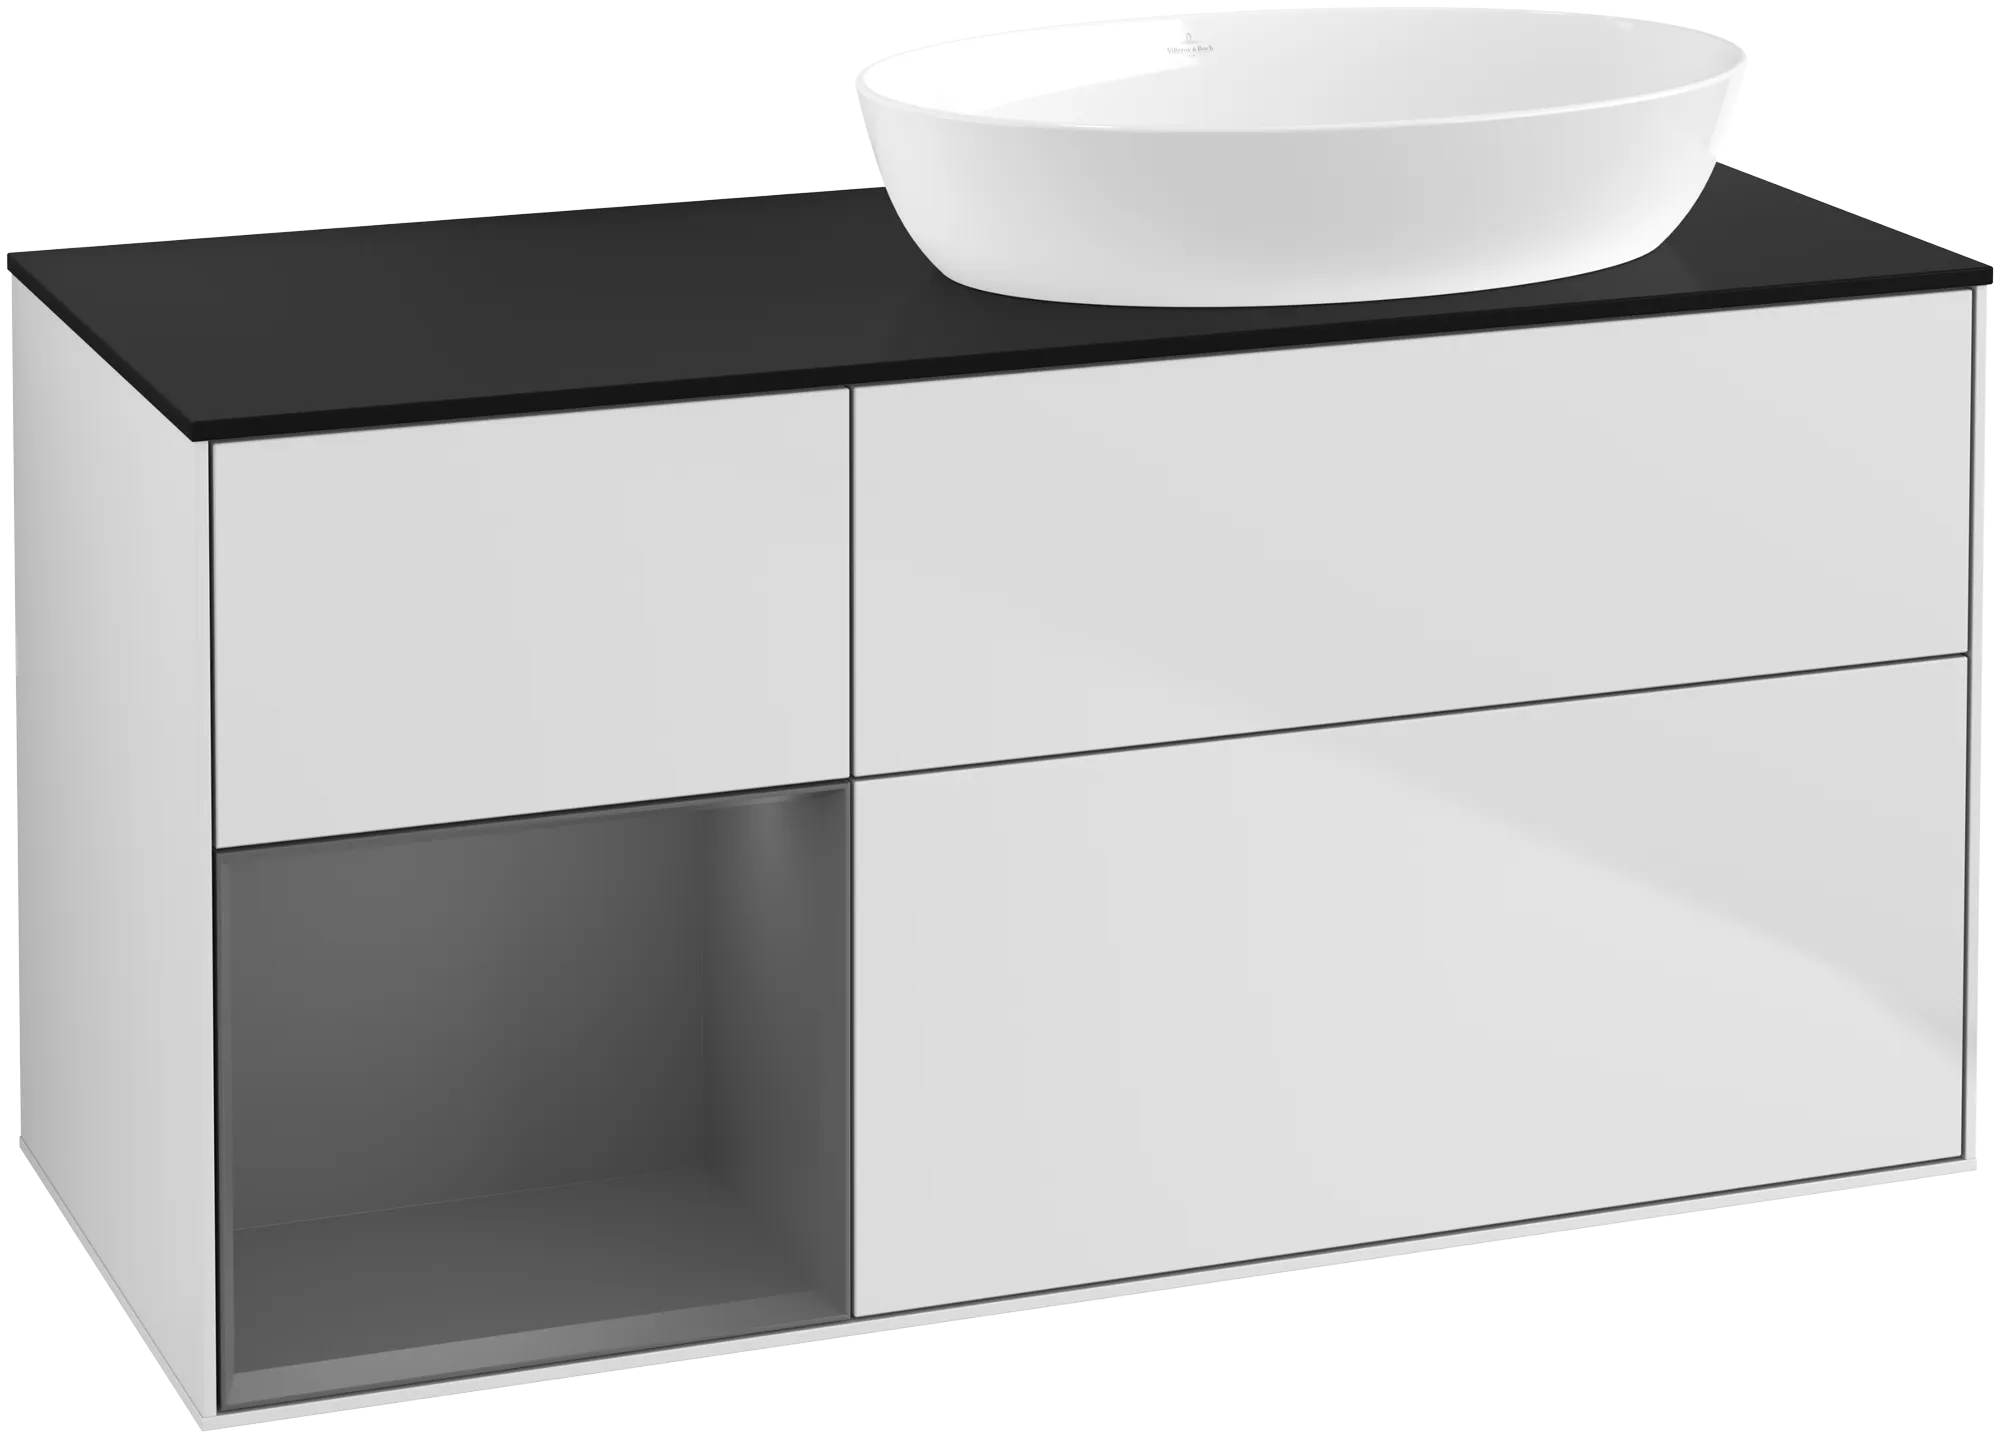 Picture of VILLEROY BOCH Finion Vanity unit, with lighting, 3 pull-out compartments, 1200 x 603 x 501 mm, White Matt Lacquer / Anthracite Matt Lacquer / Glass Black Matt #GA42GKMT